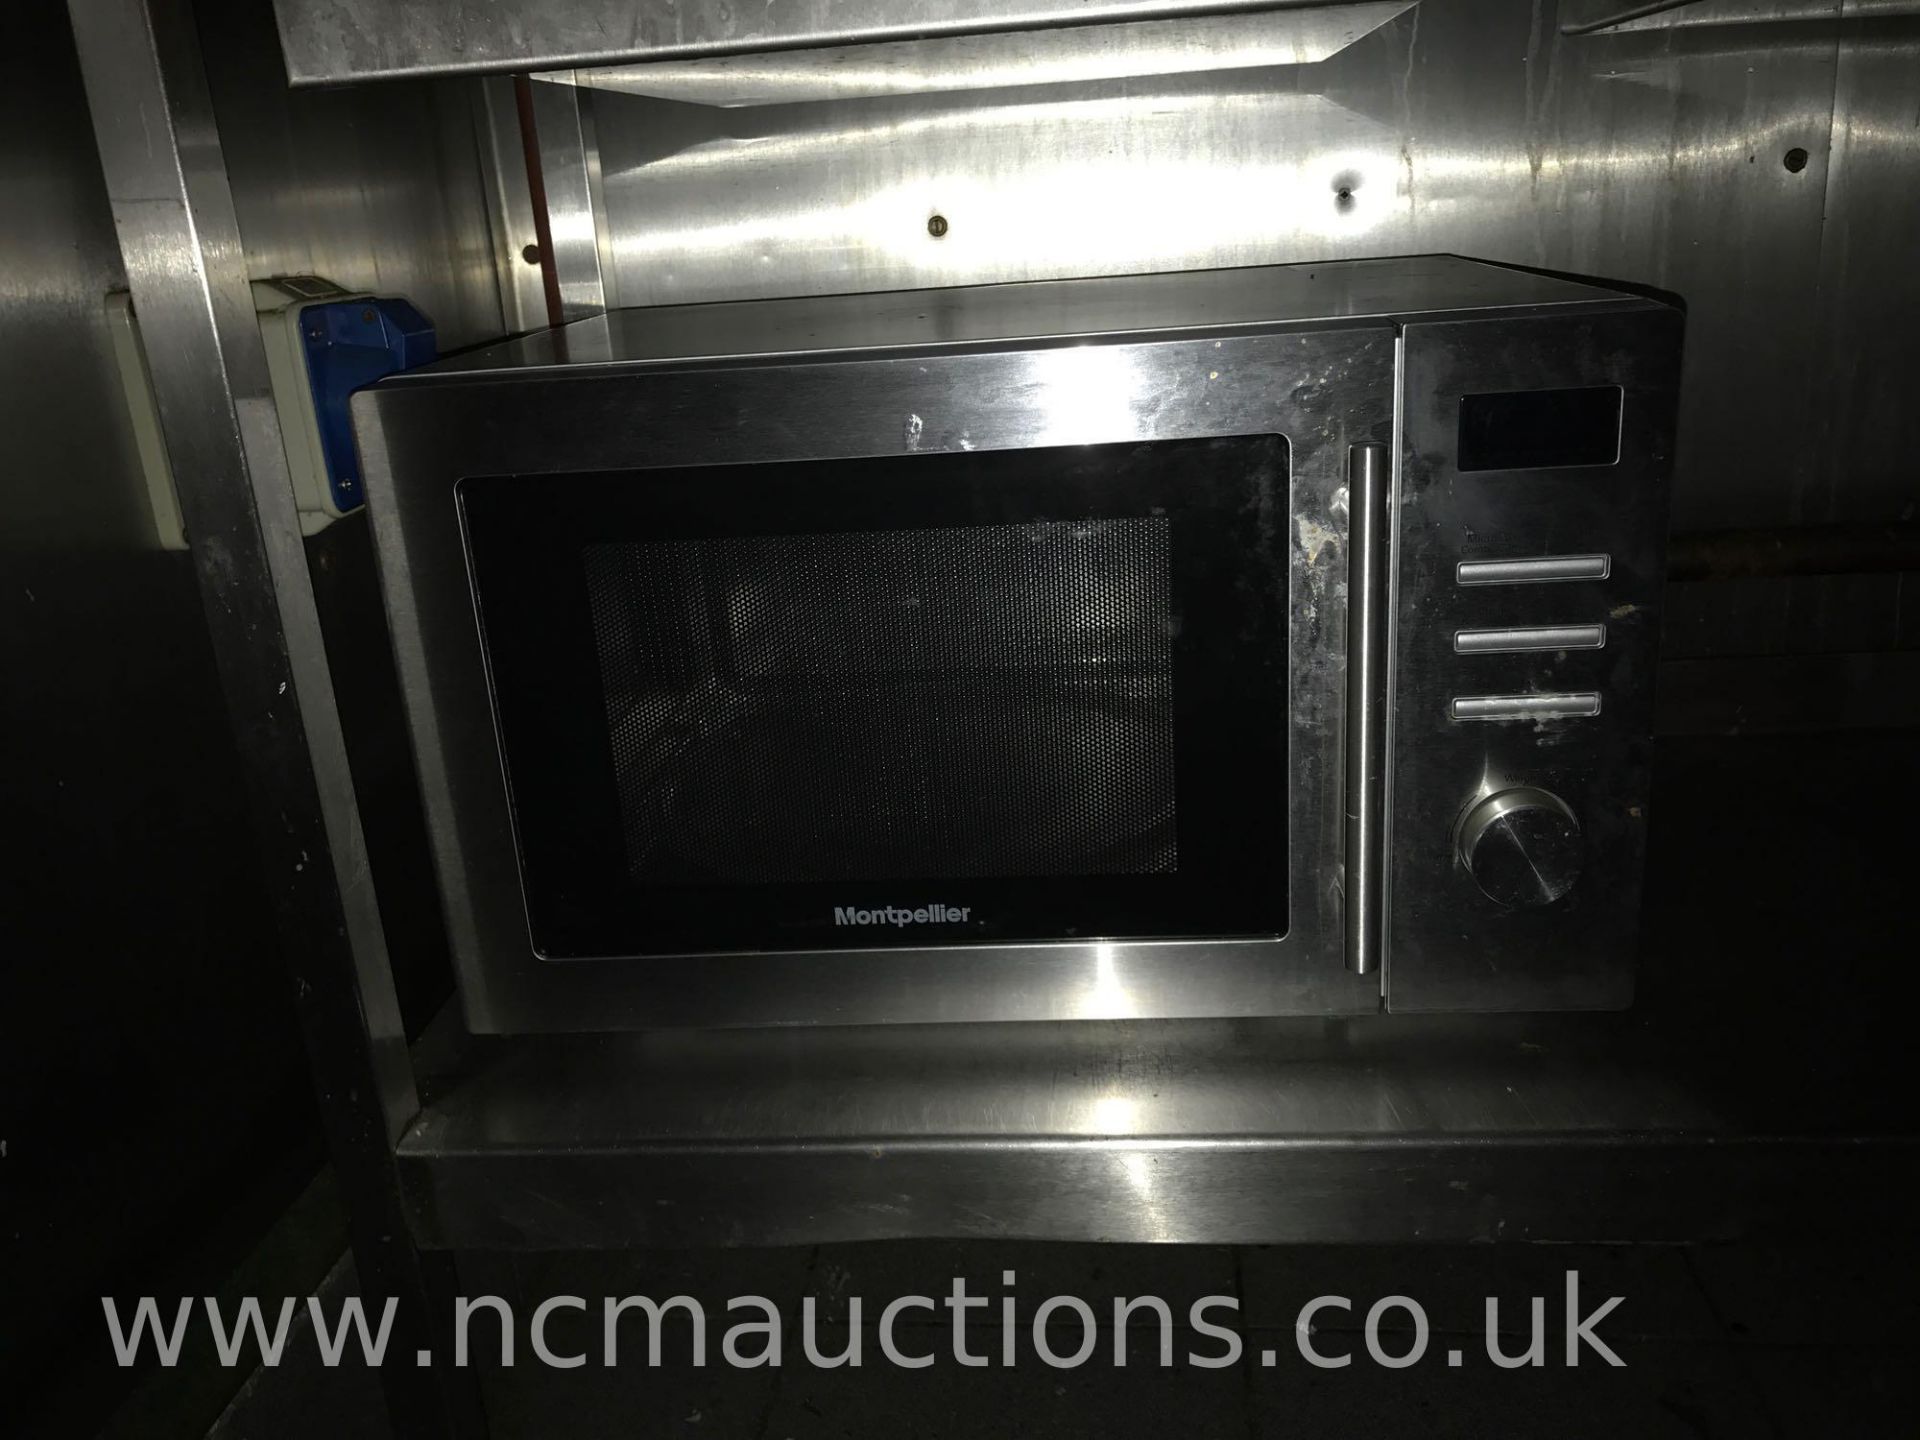 Montpellier microwave and stainless steel counter on caster wheels